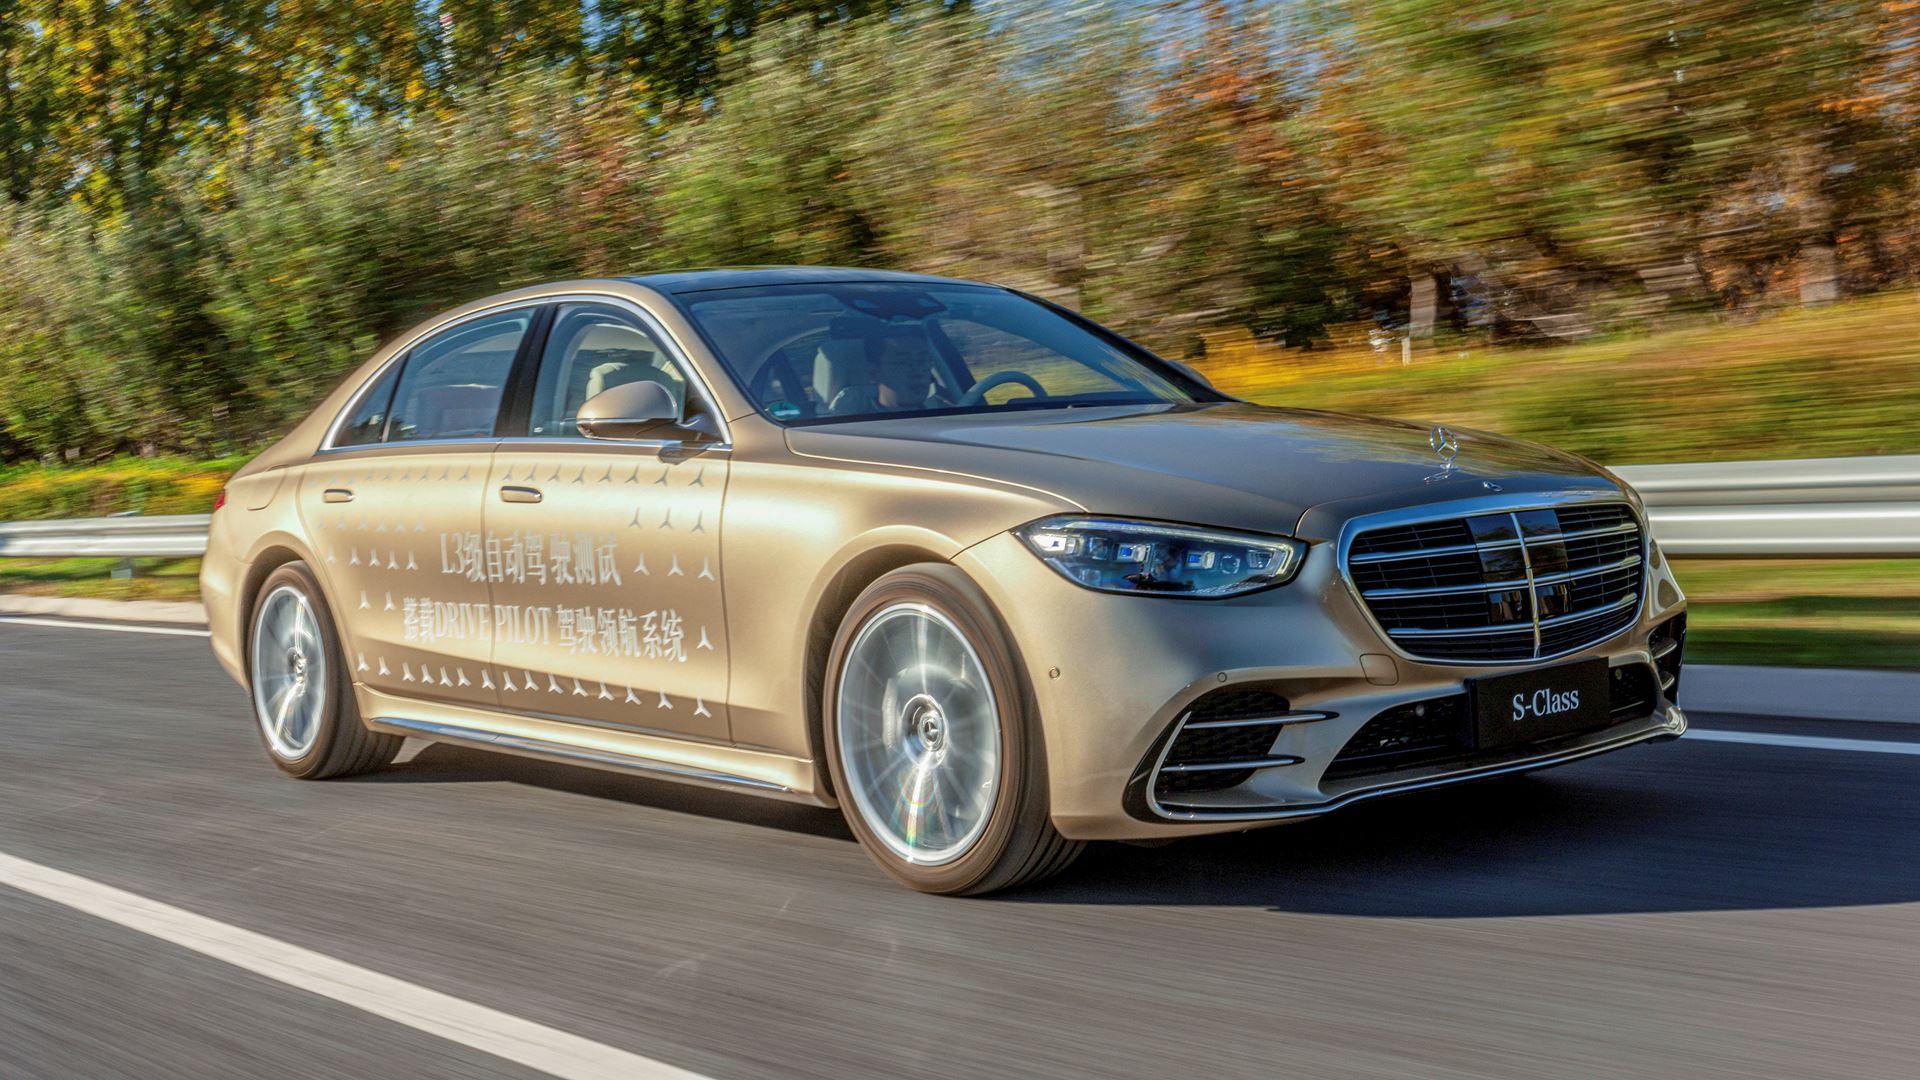 Mercedes Benz Obtains Approval for Conditionally Automated Driving Test License in Beijing